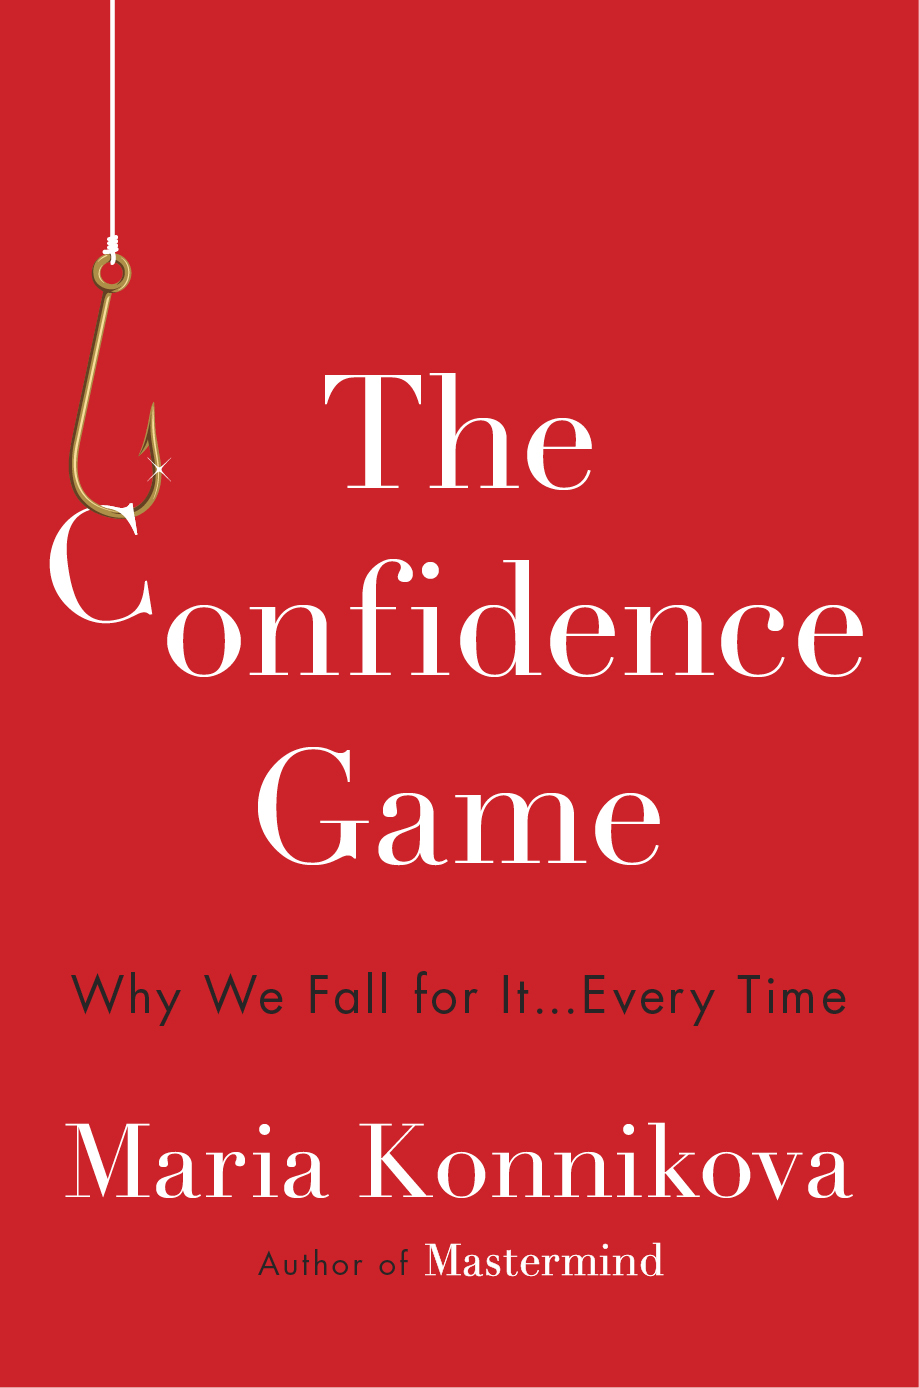 theconfidencegame_jkf_r3_a